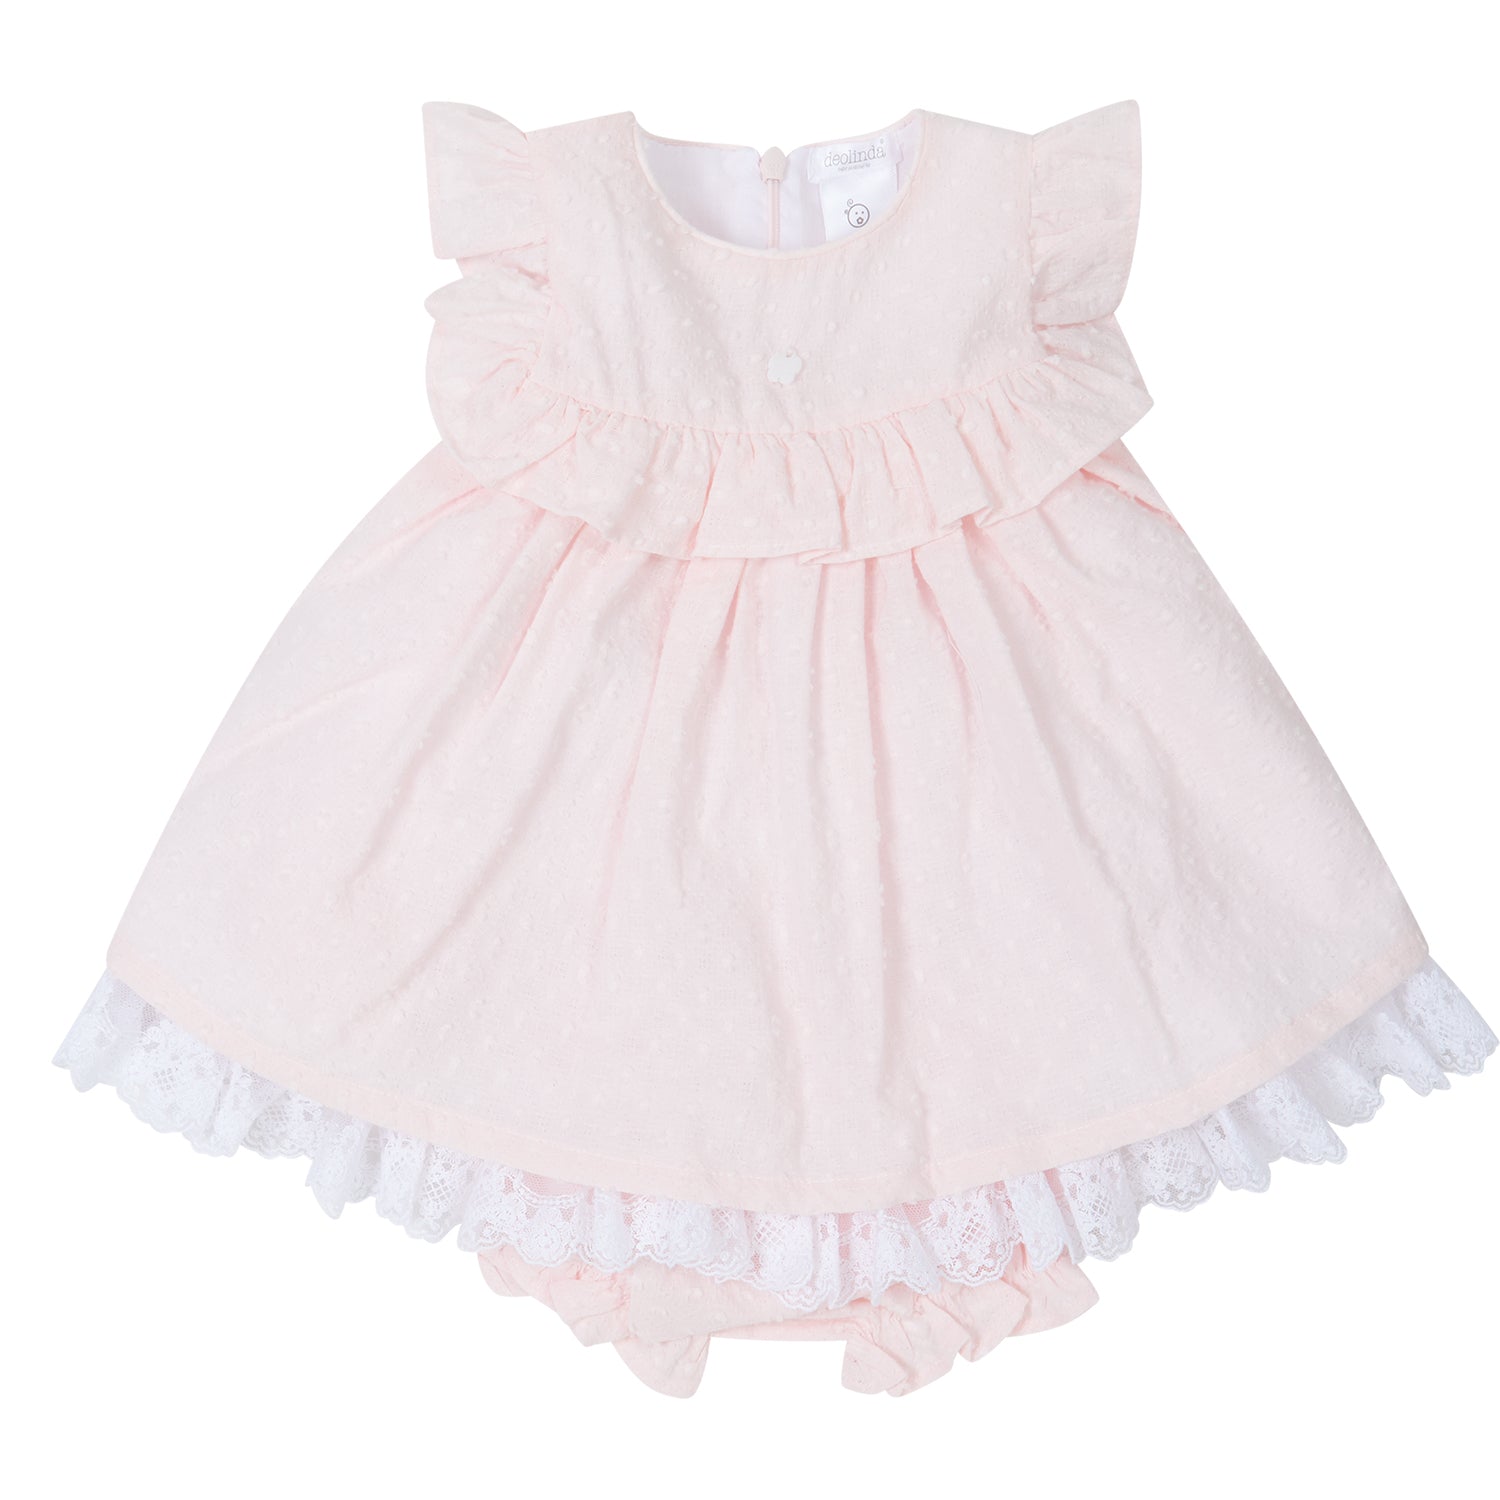 Pink Lace Trim Dress and Bloomers